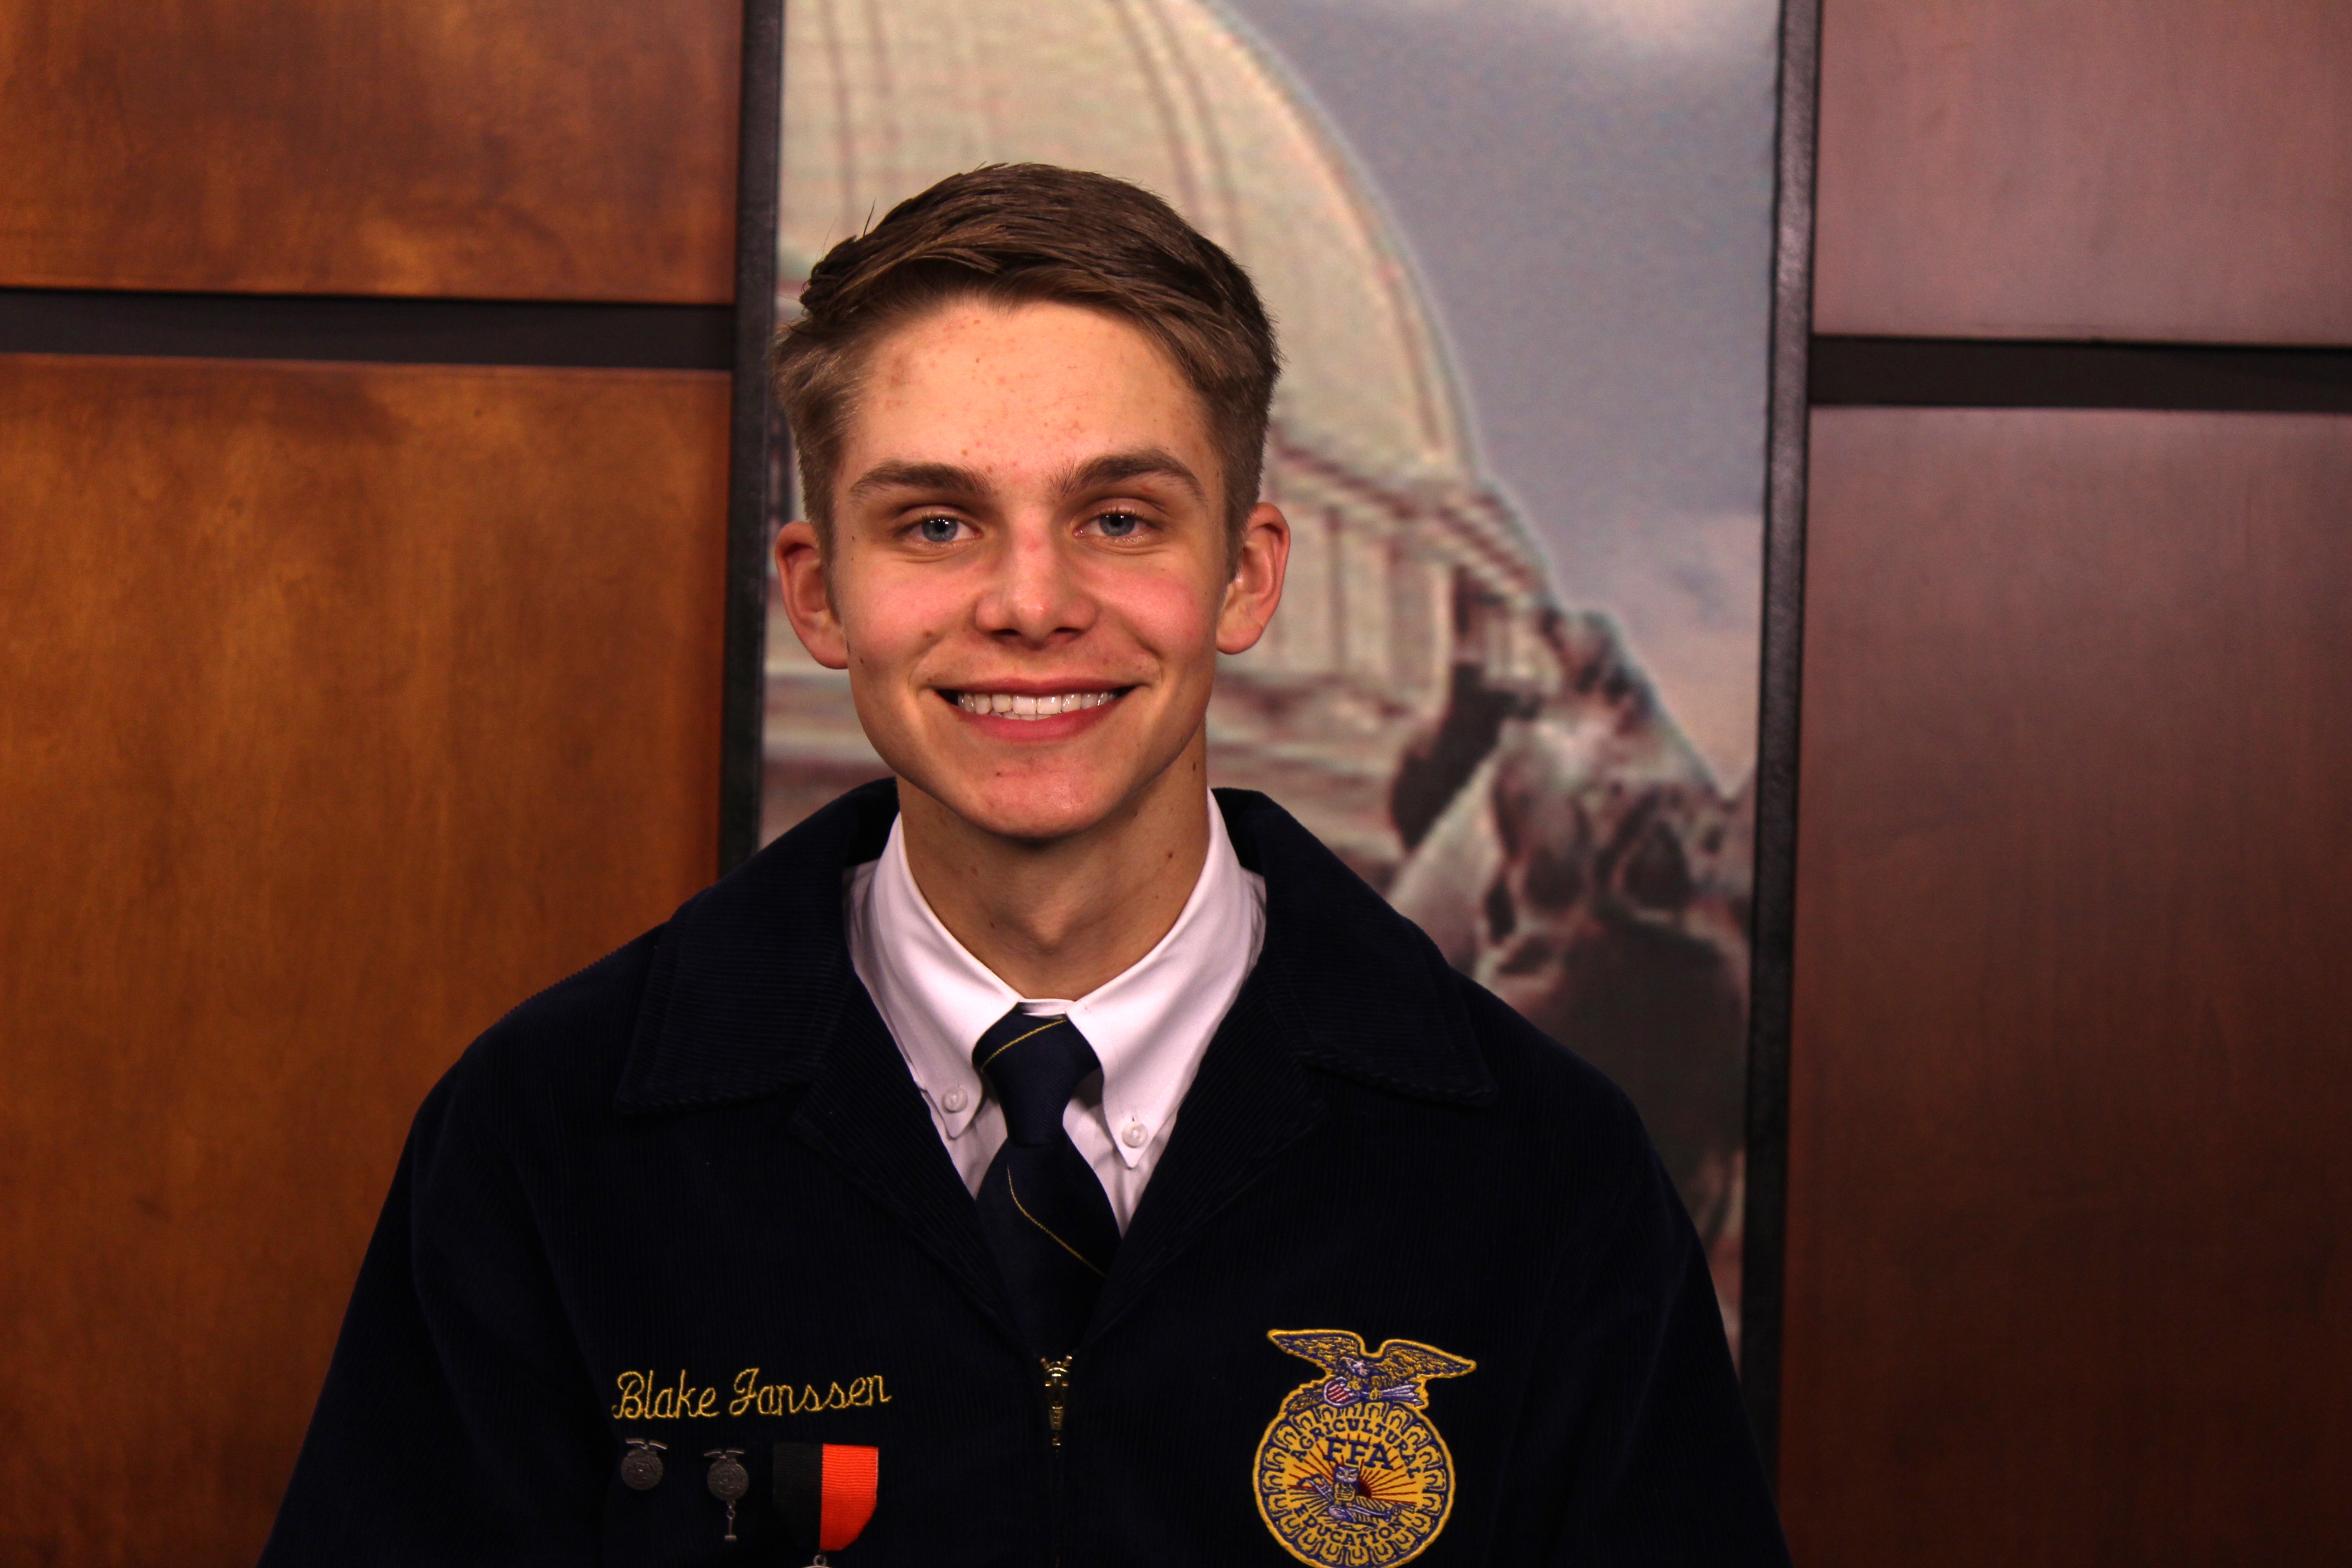 Introducing Blake Janssen of the Amber-Pocasset FFA Chapter, Your 2022 Southwest Area Star in Agricultural Production